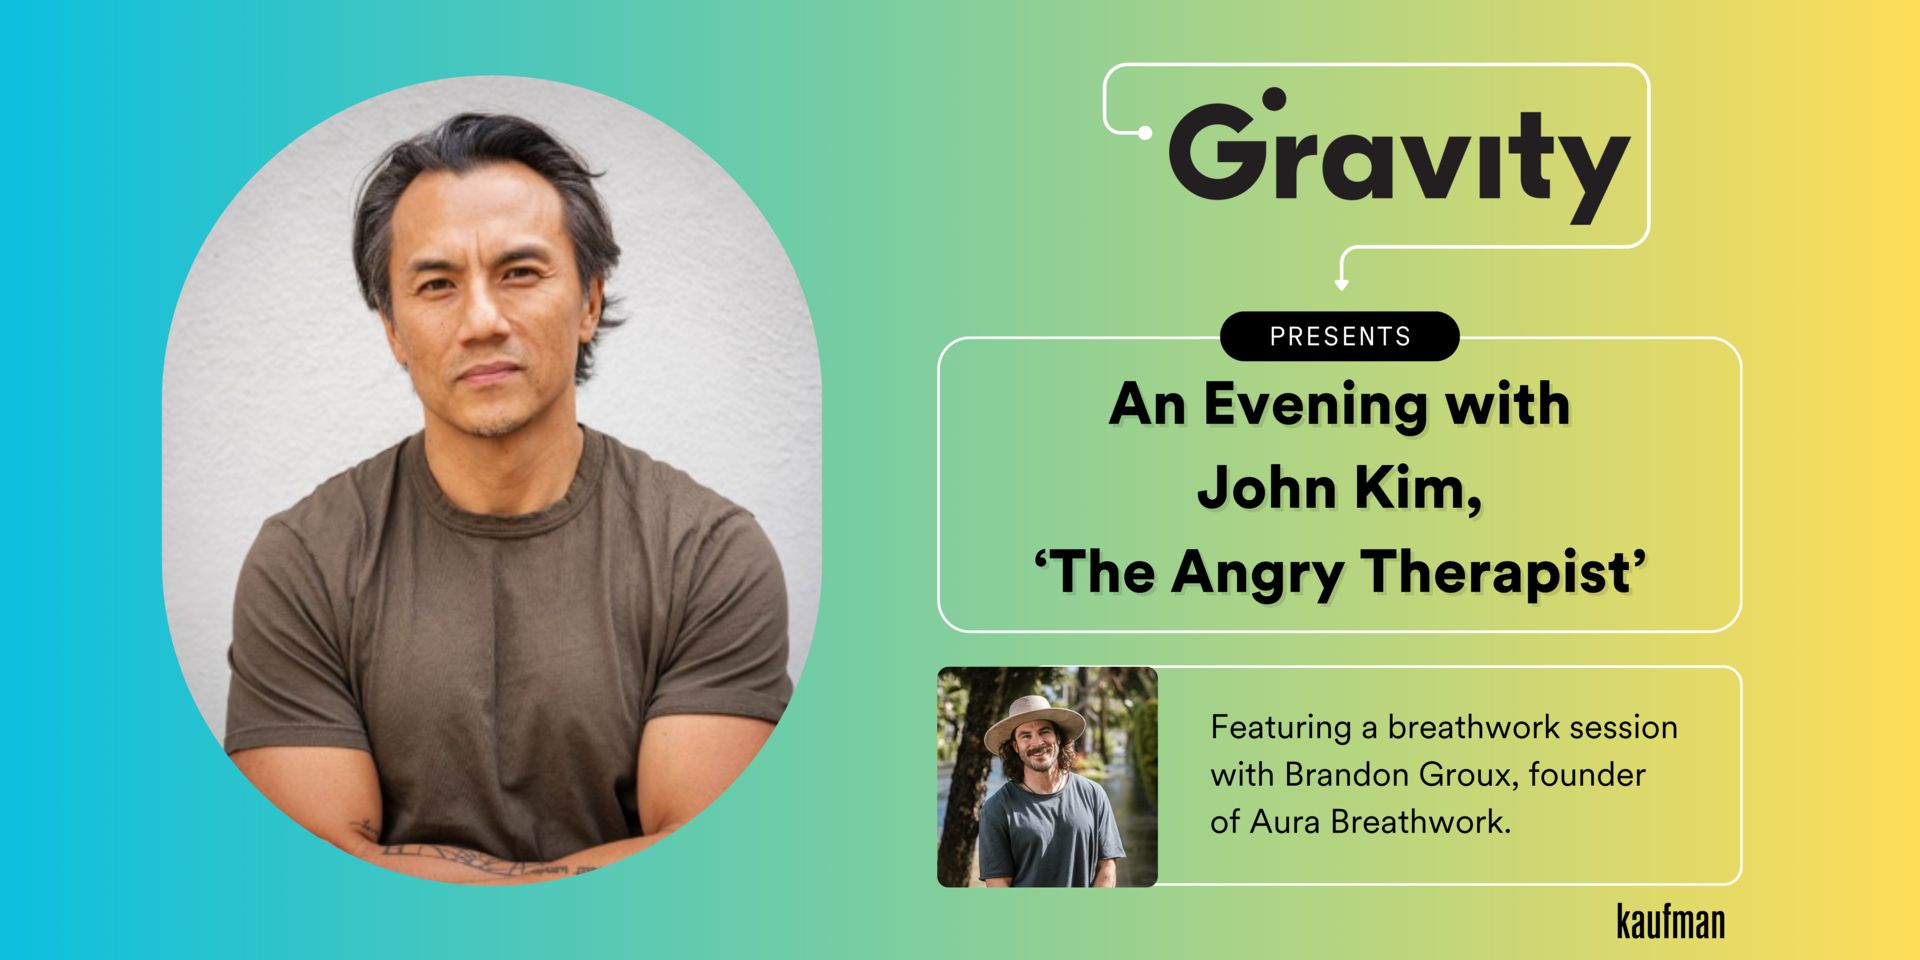 An Evening with John Kim, "The Angry Therapist", at Gravity, Columbus, Ohio, United States